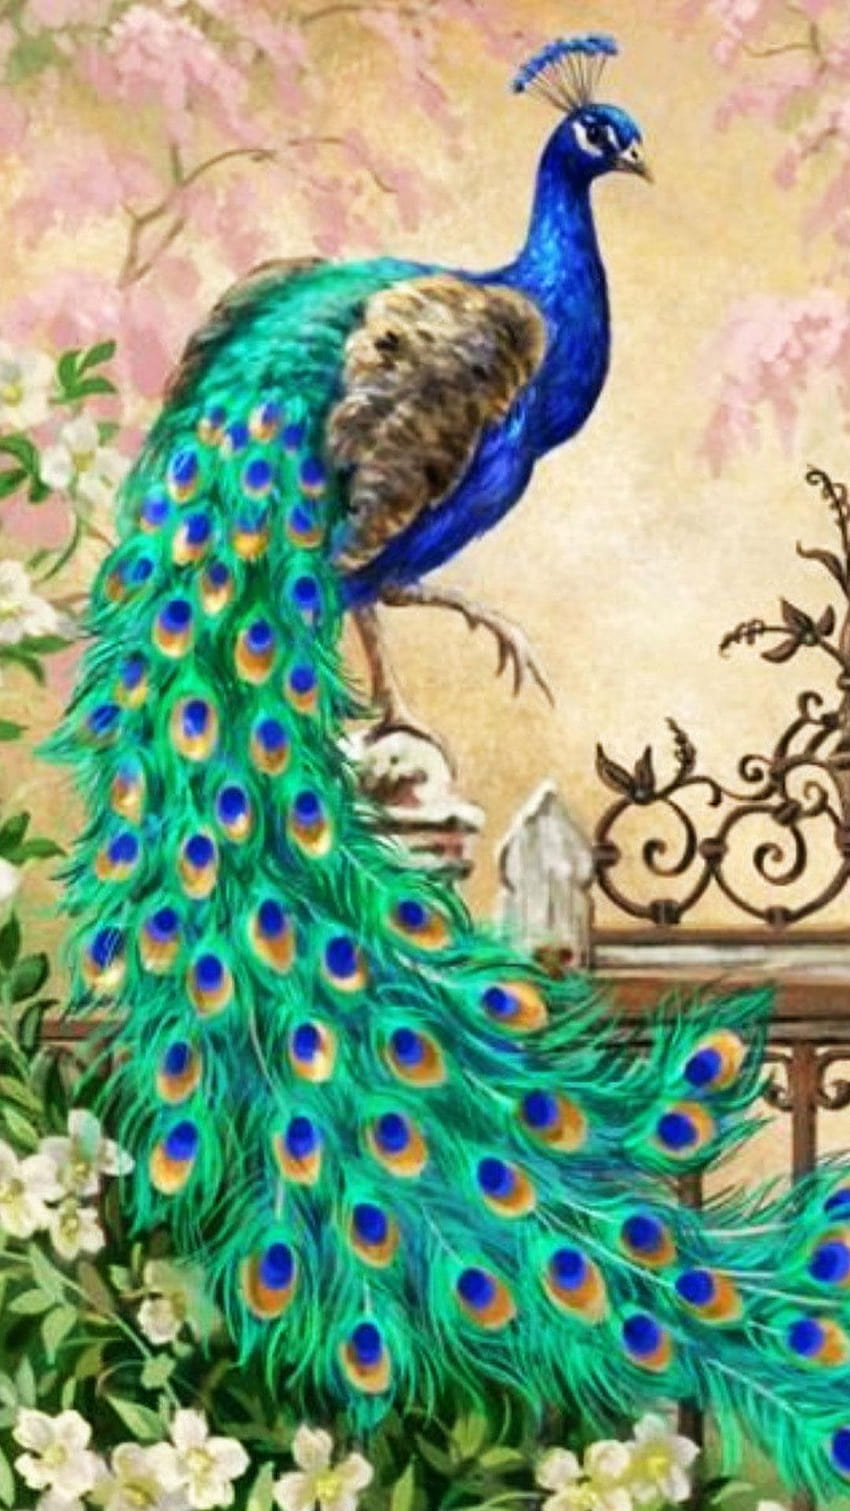 Peacock Live of Peacocks for Android, peacock android phone HD phone wallpaper